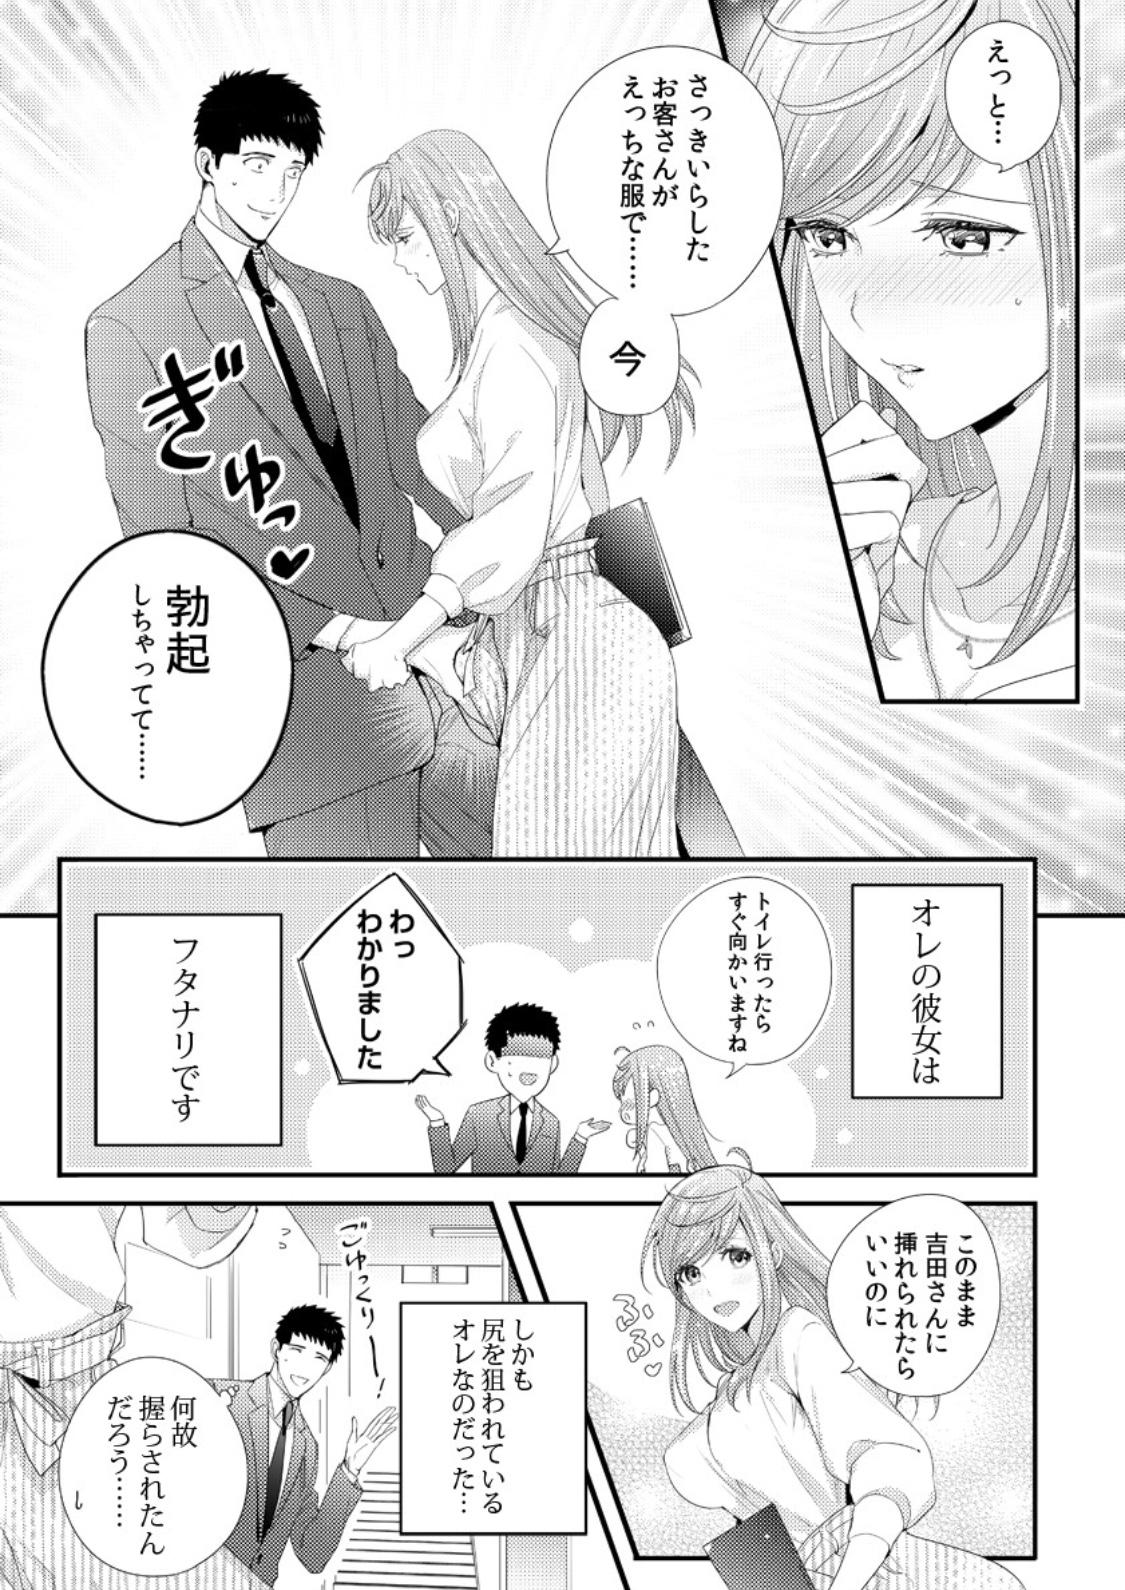 Please Let Me Hold You Futaba-San! Ch. 1-4 2